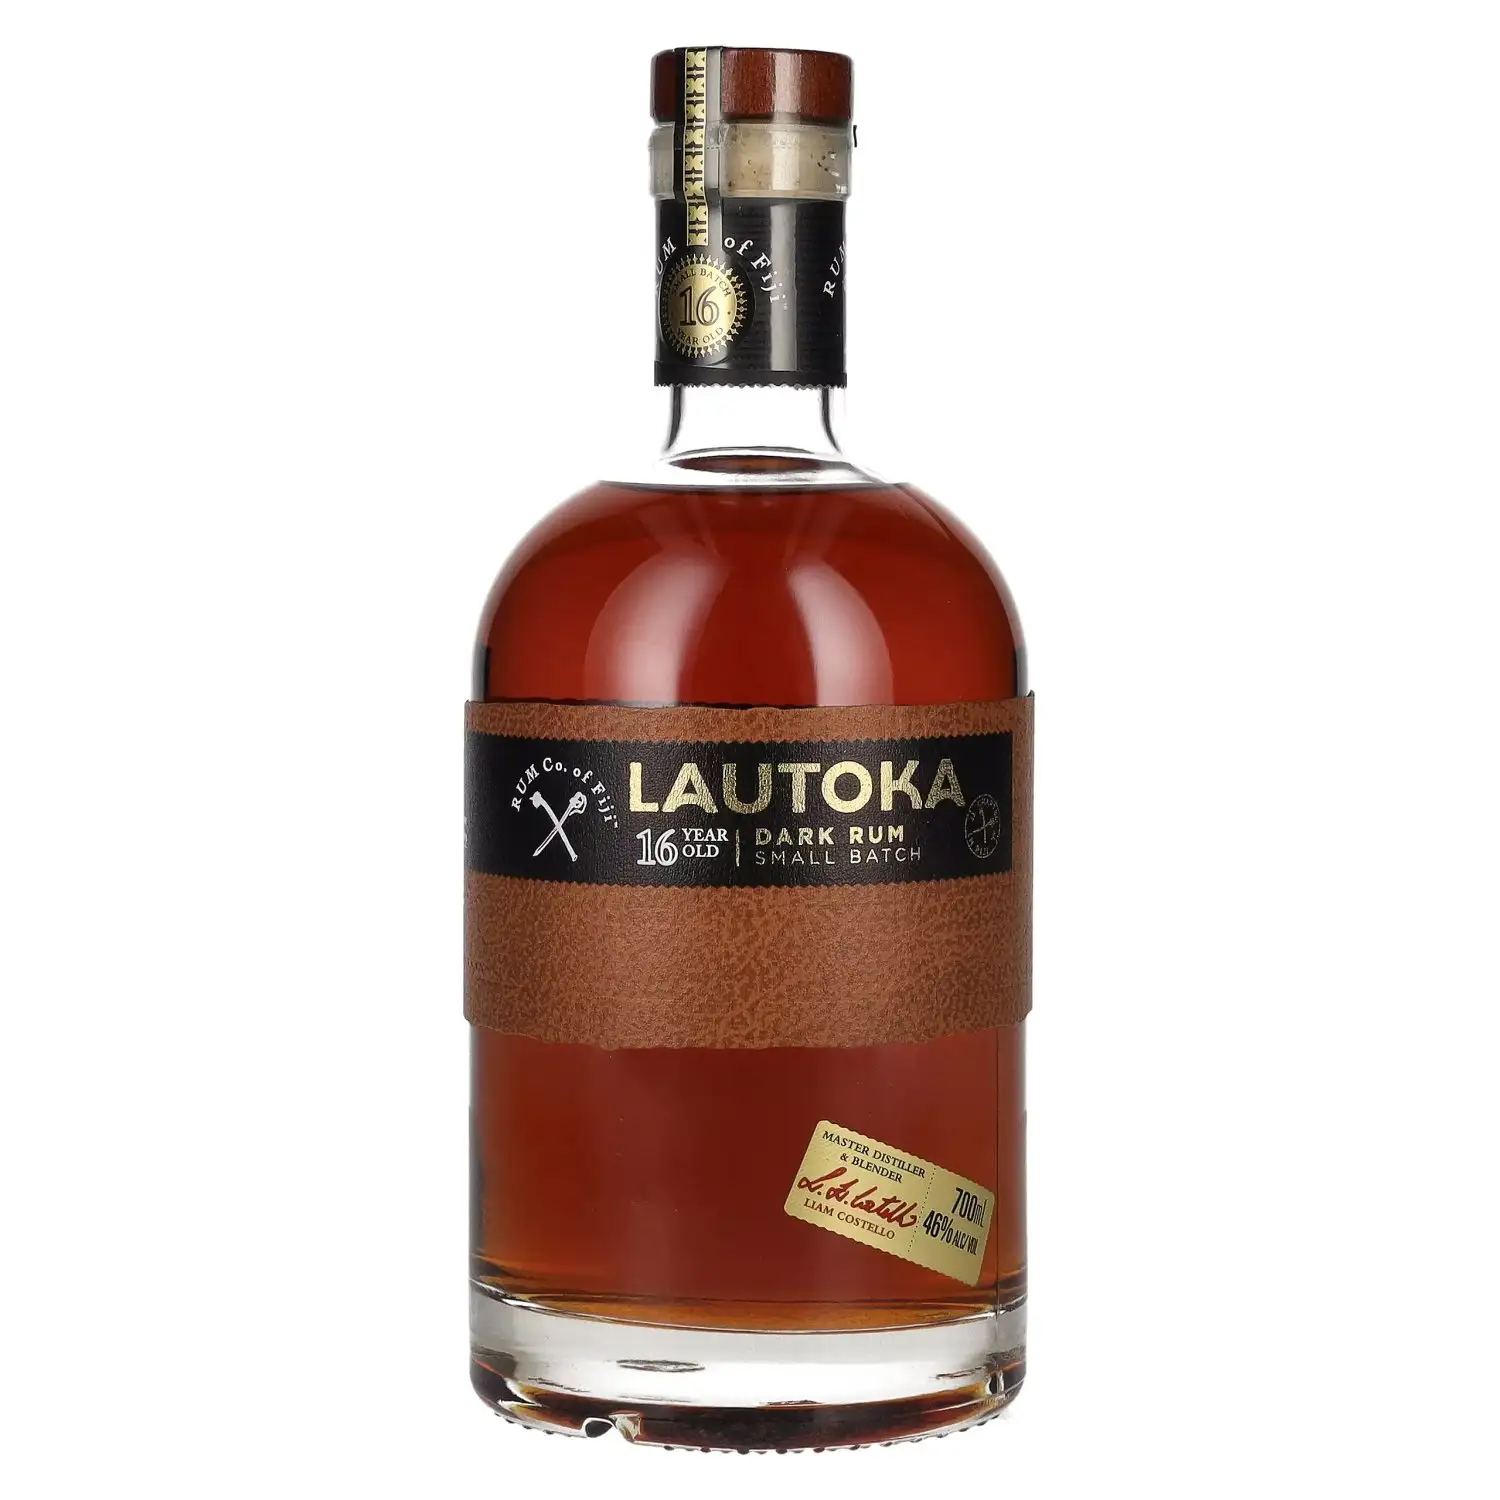 Image of the front of the bottle of the rum Lautoka